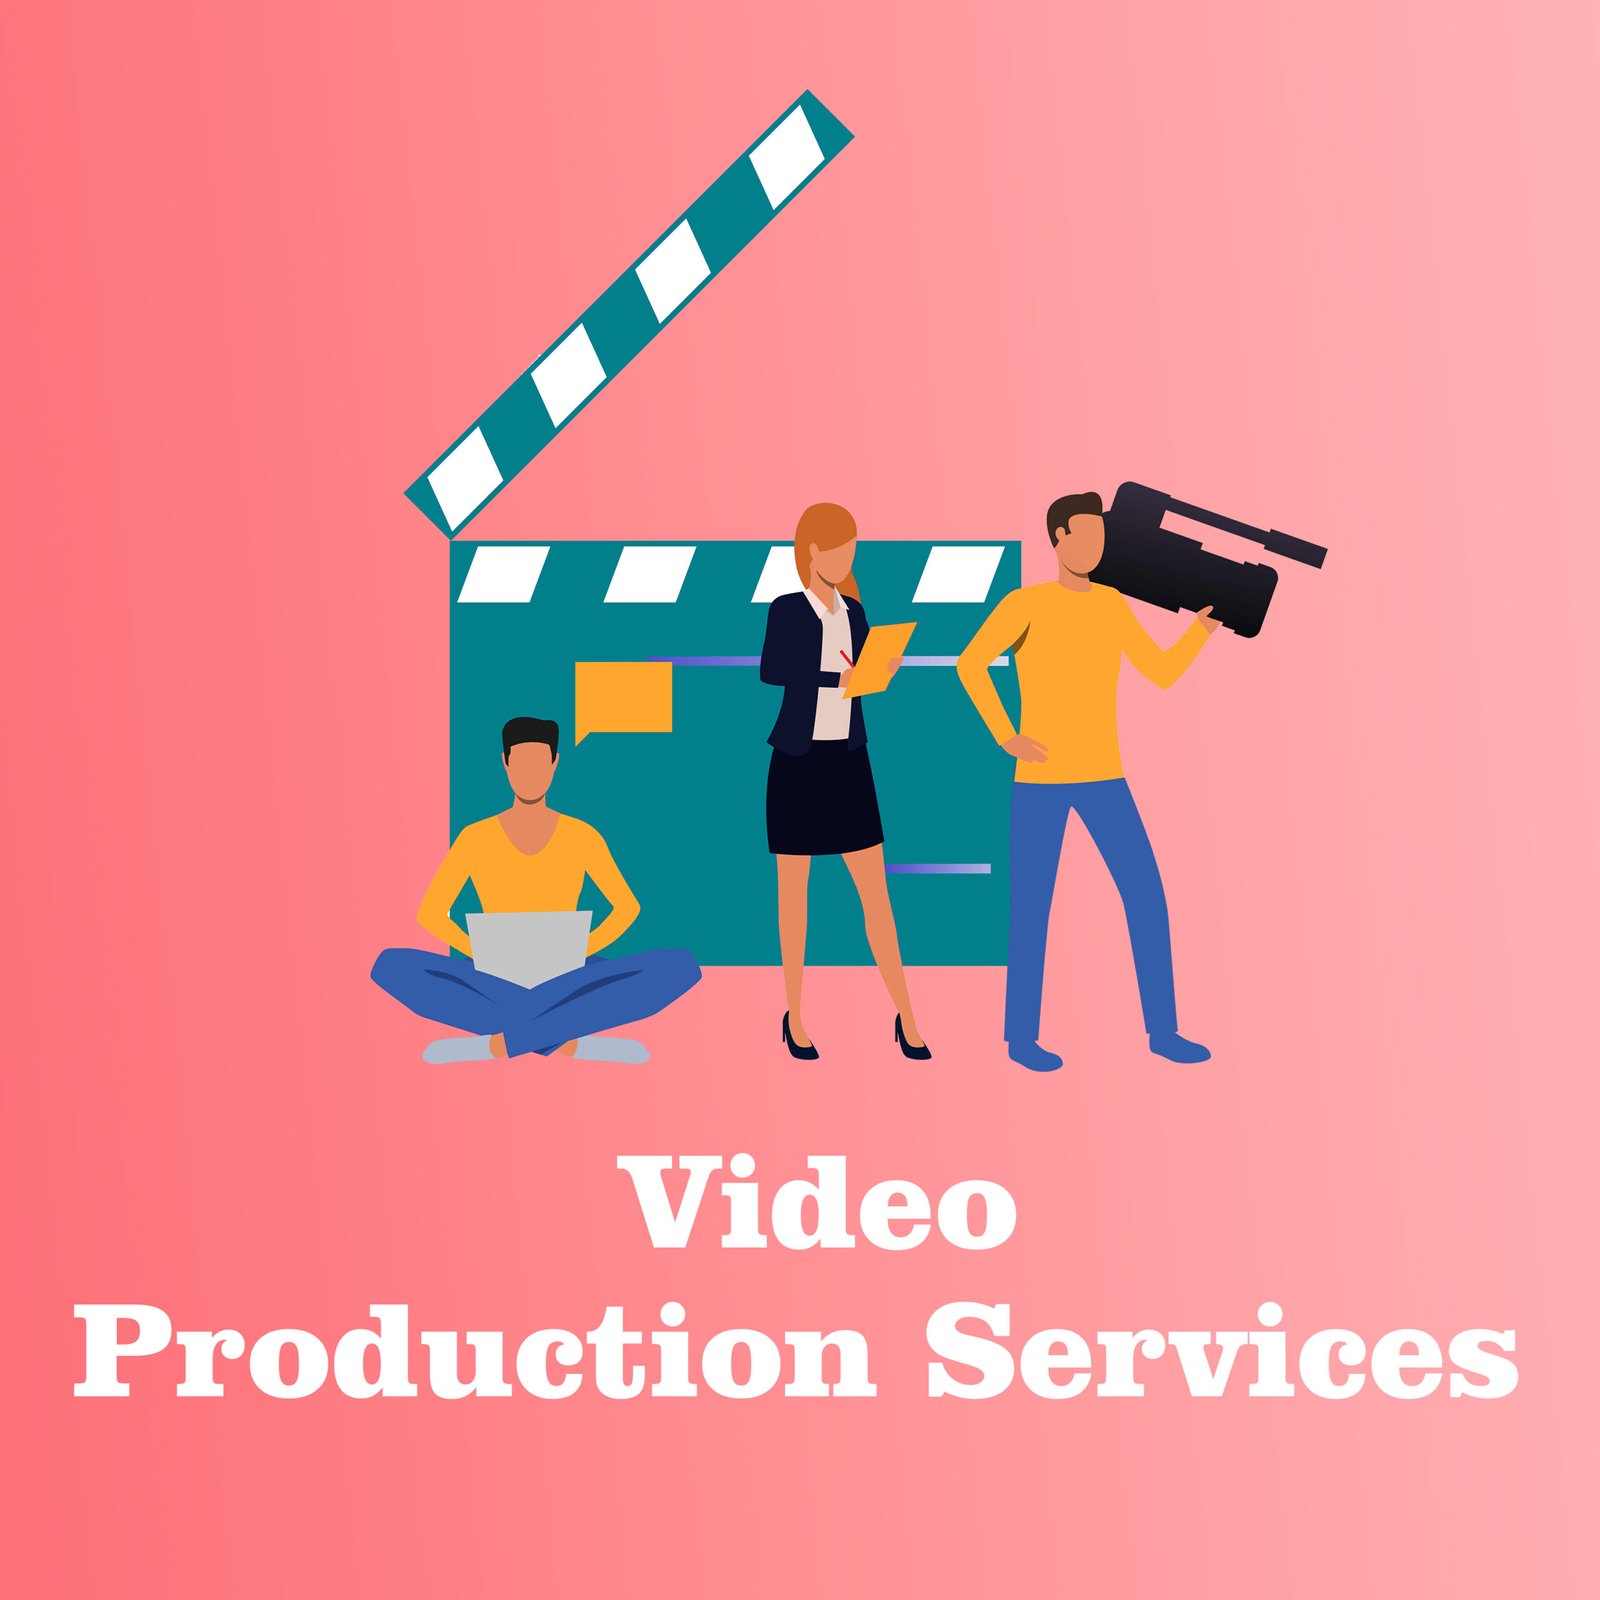 Video production service